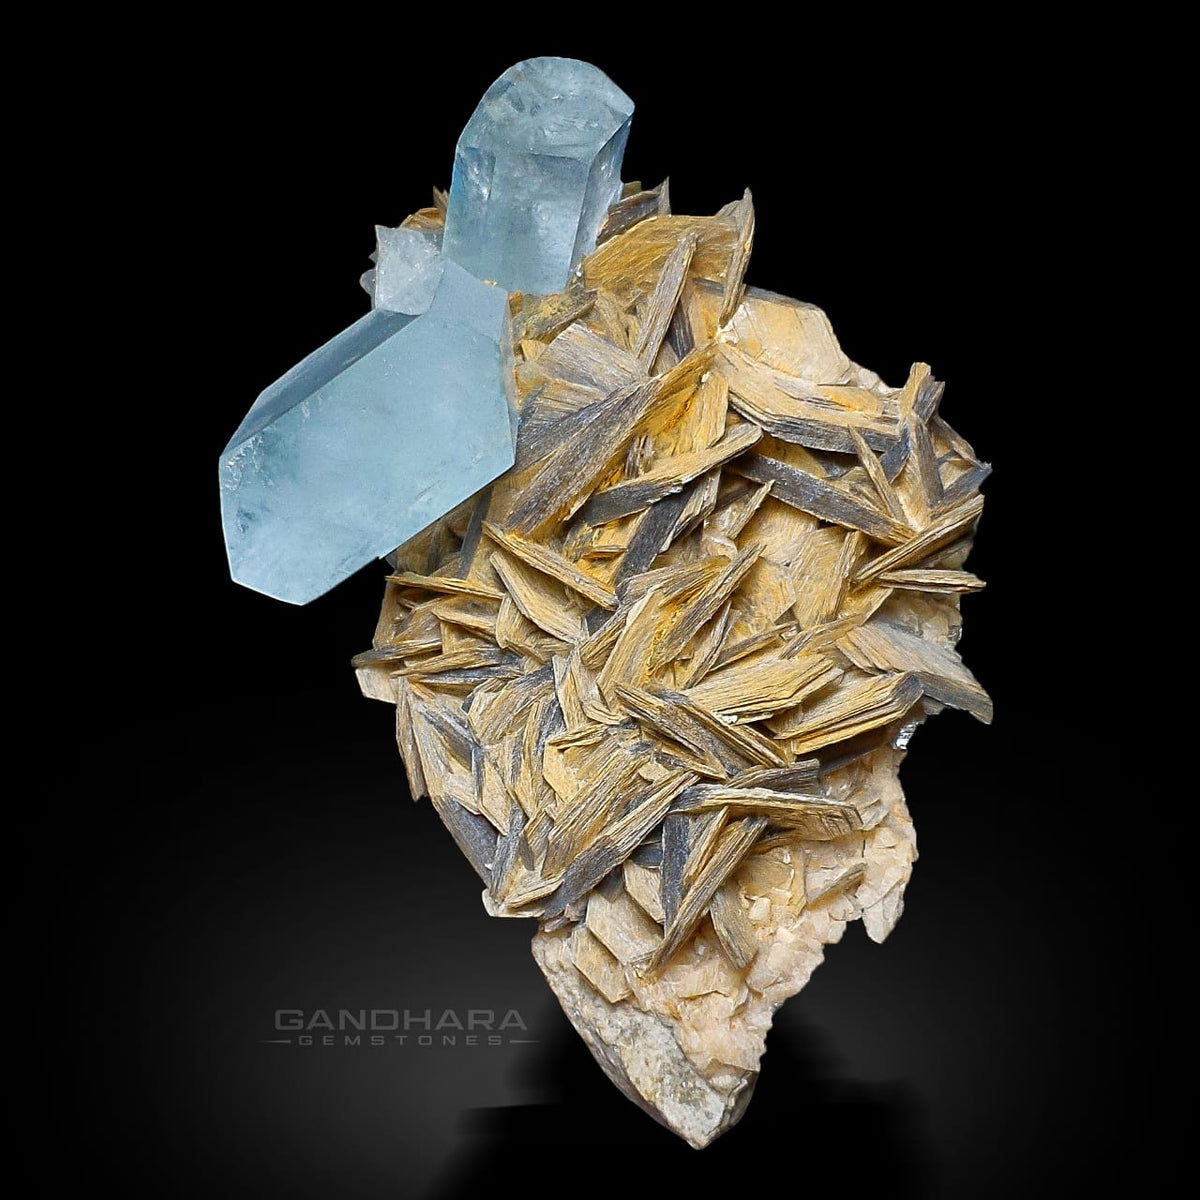 Well Crystalized Aquamarine Crystals Perched on Muscovite